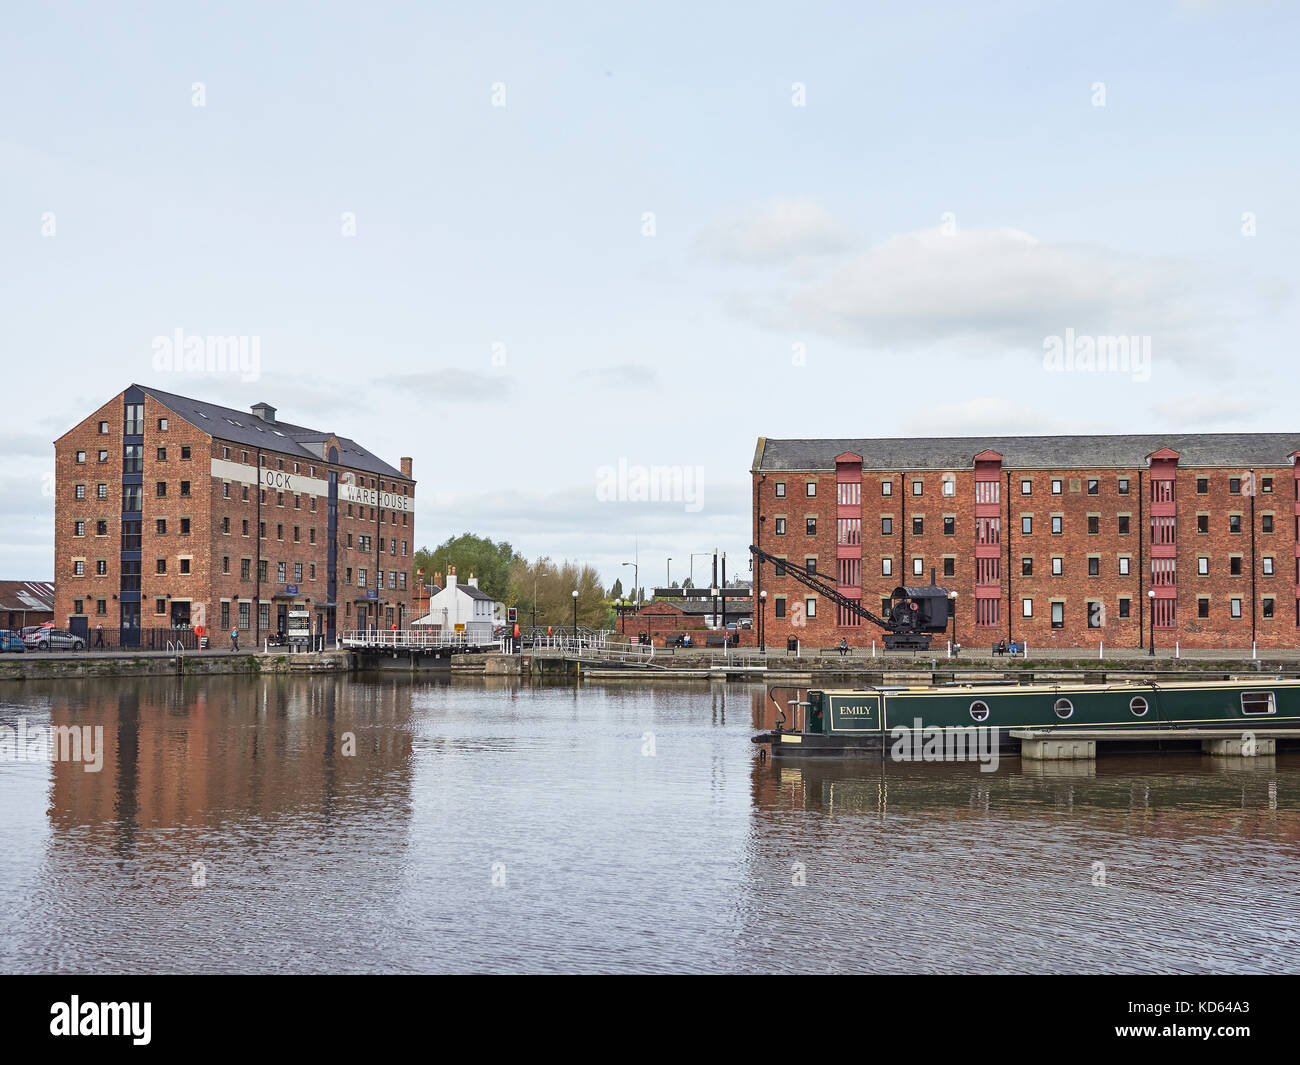 The City of Gloucester and Gloucester docks and warehouses and canal narrow boat Stock Photo